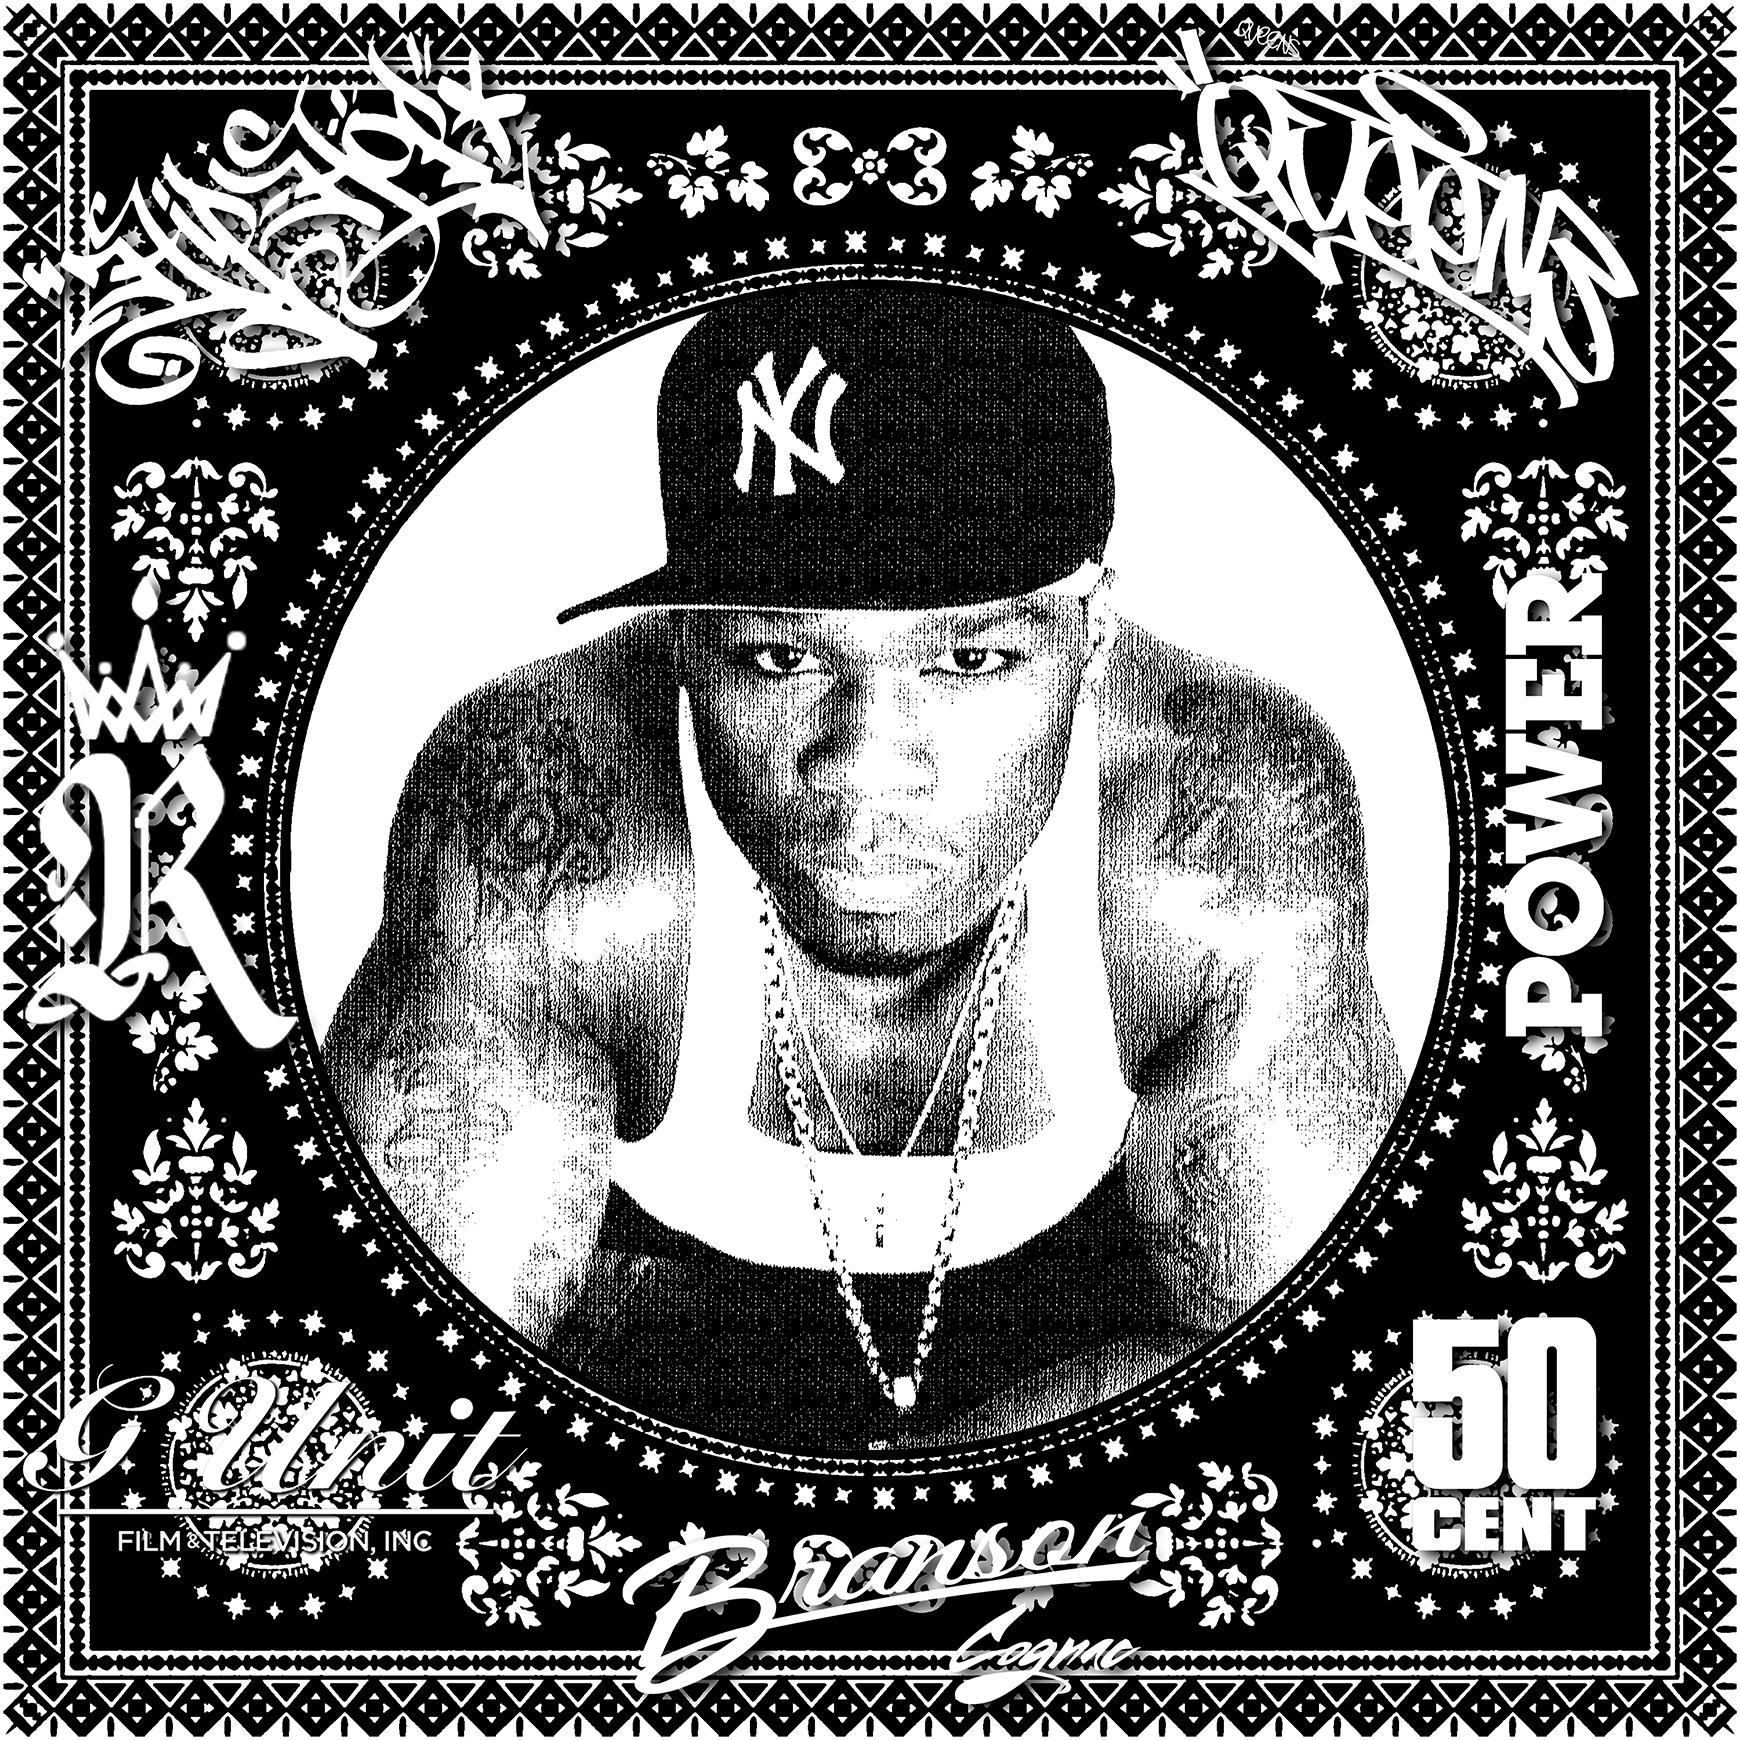 50 Cent (Black & White) (50 Years, Hip Hop, Rap, Iconic, Artist, Musician) - Print by Agent X